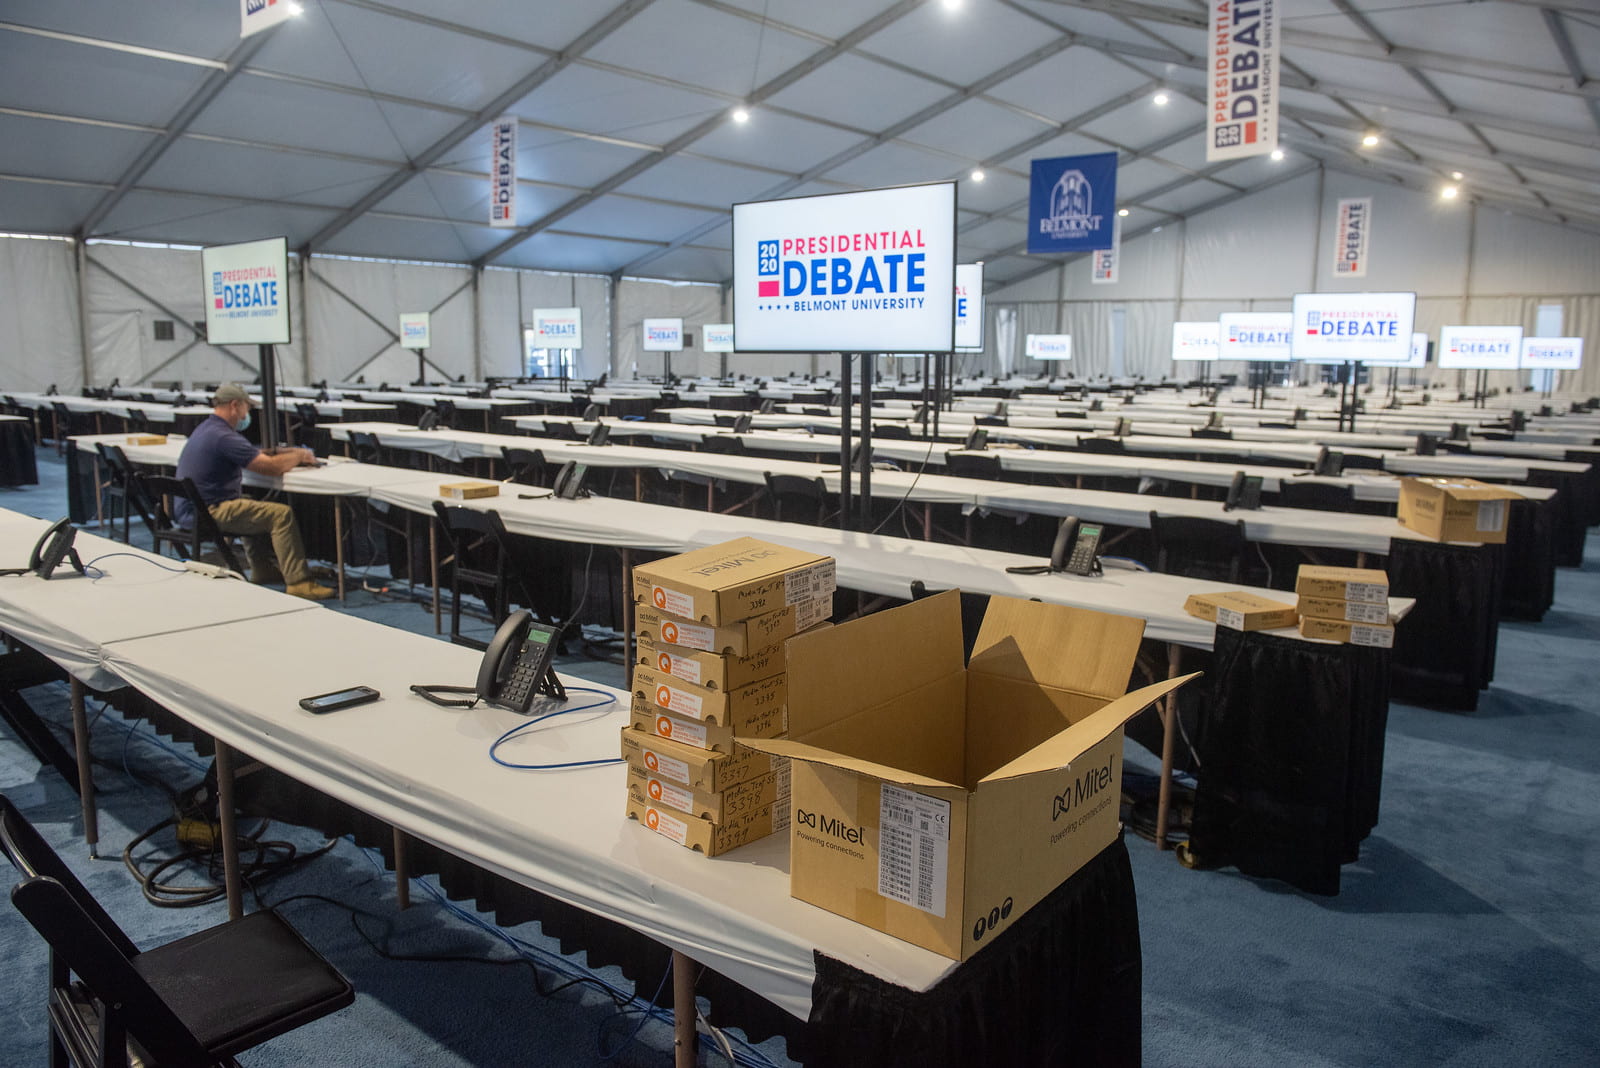 Rows of tables and monitors reading "2020 Presidential Debate: Belmont University" inside the media tent. Cardboard boxes sit on the corner of the closest table.